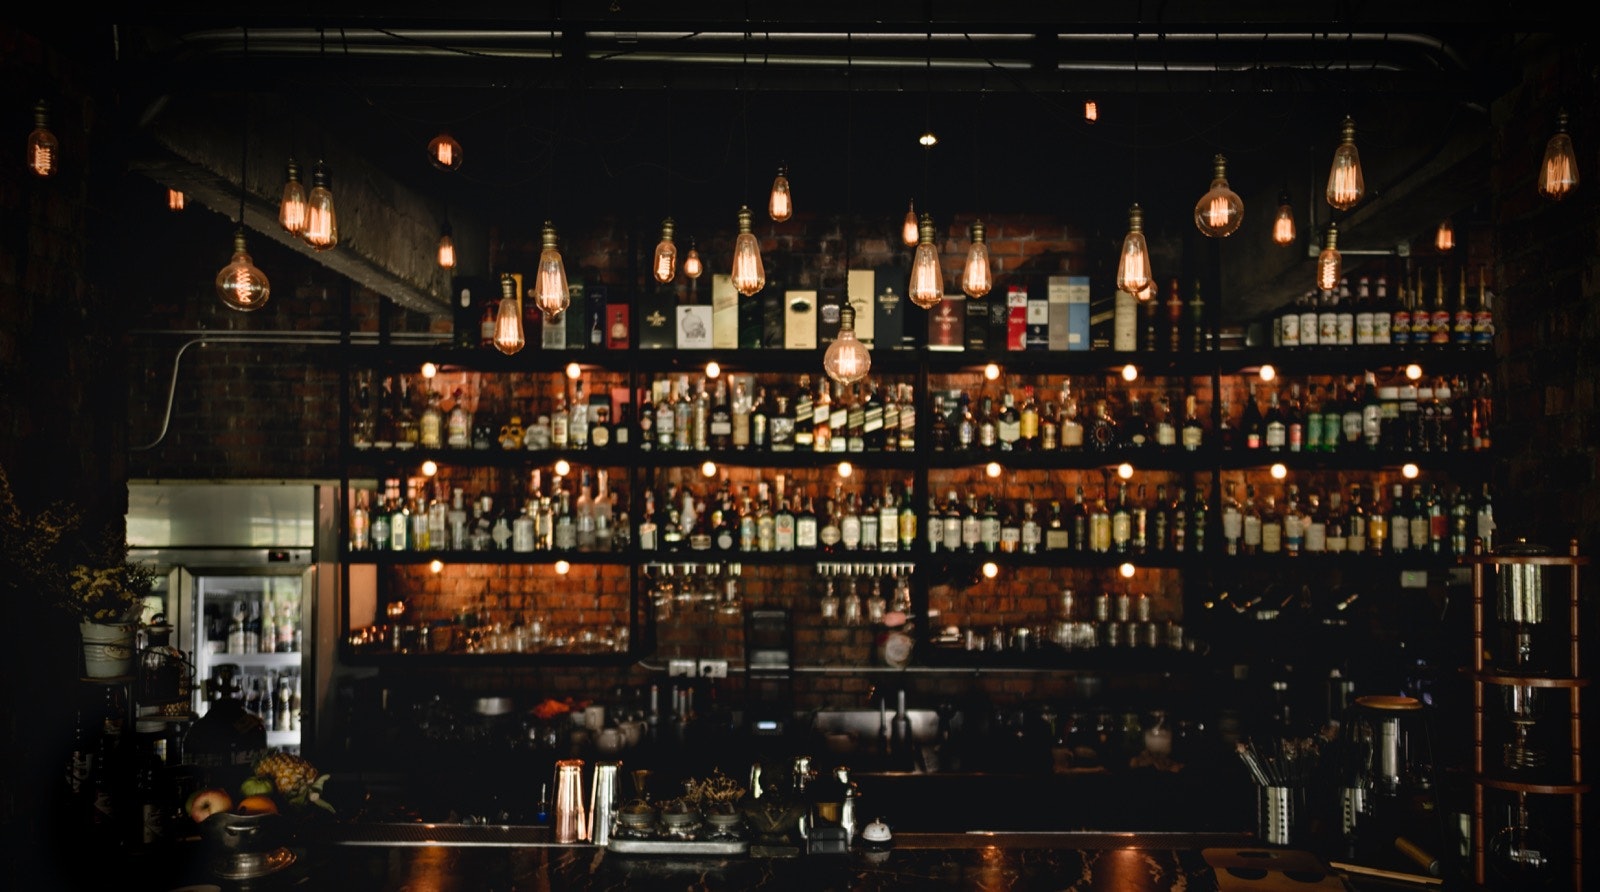 Shelves of bottles are illuminated by vintage lamps in the dark. There are glasses and other mix-drink instruments on the wooden bar. Cocktails can easily play a big role during a New Orleans weekend.     